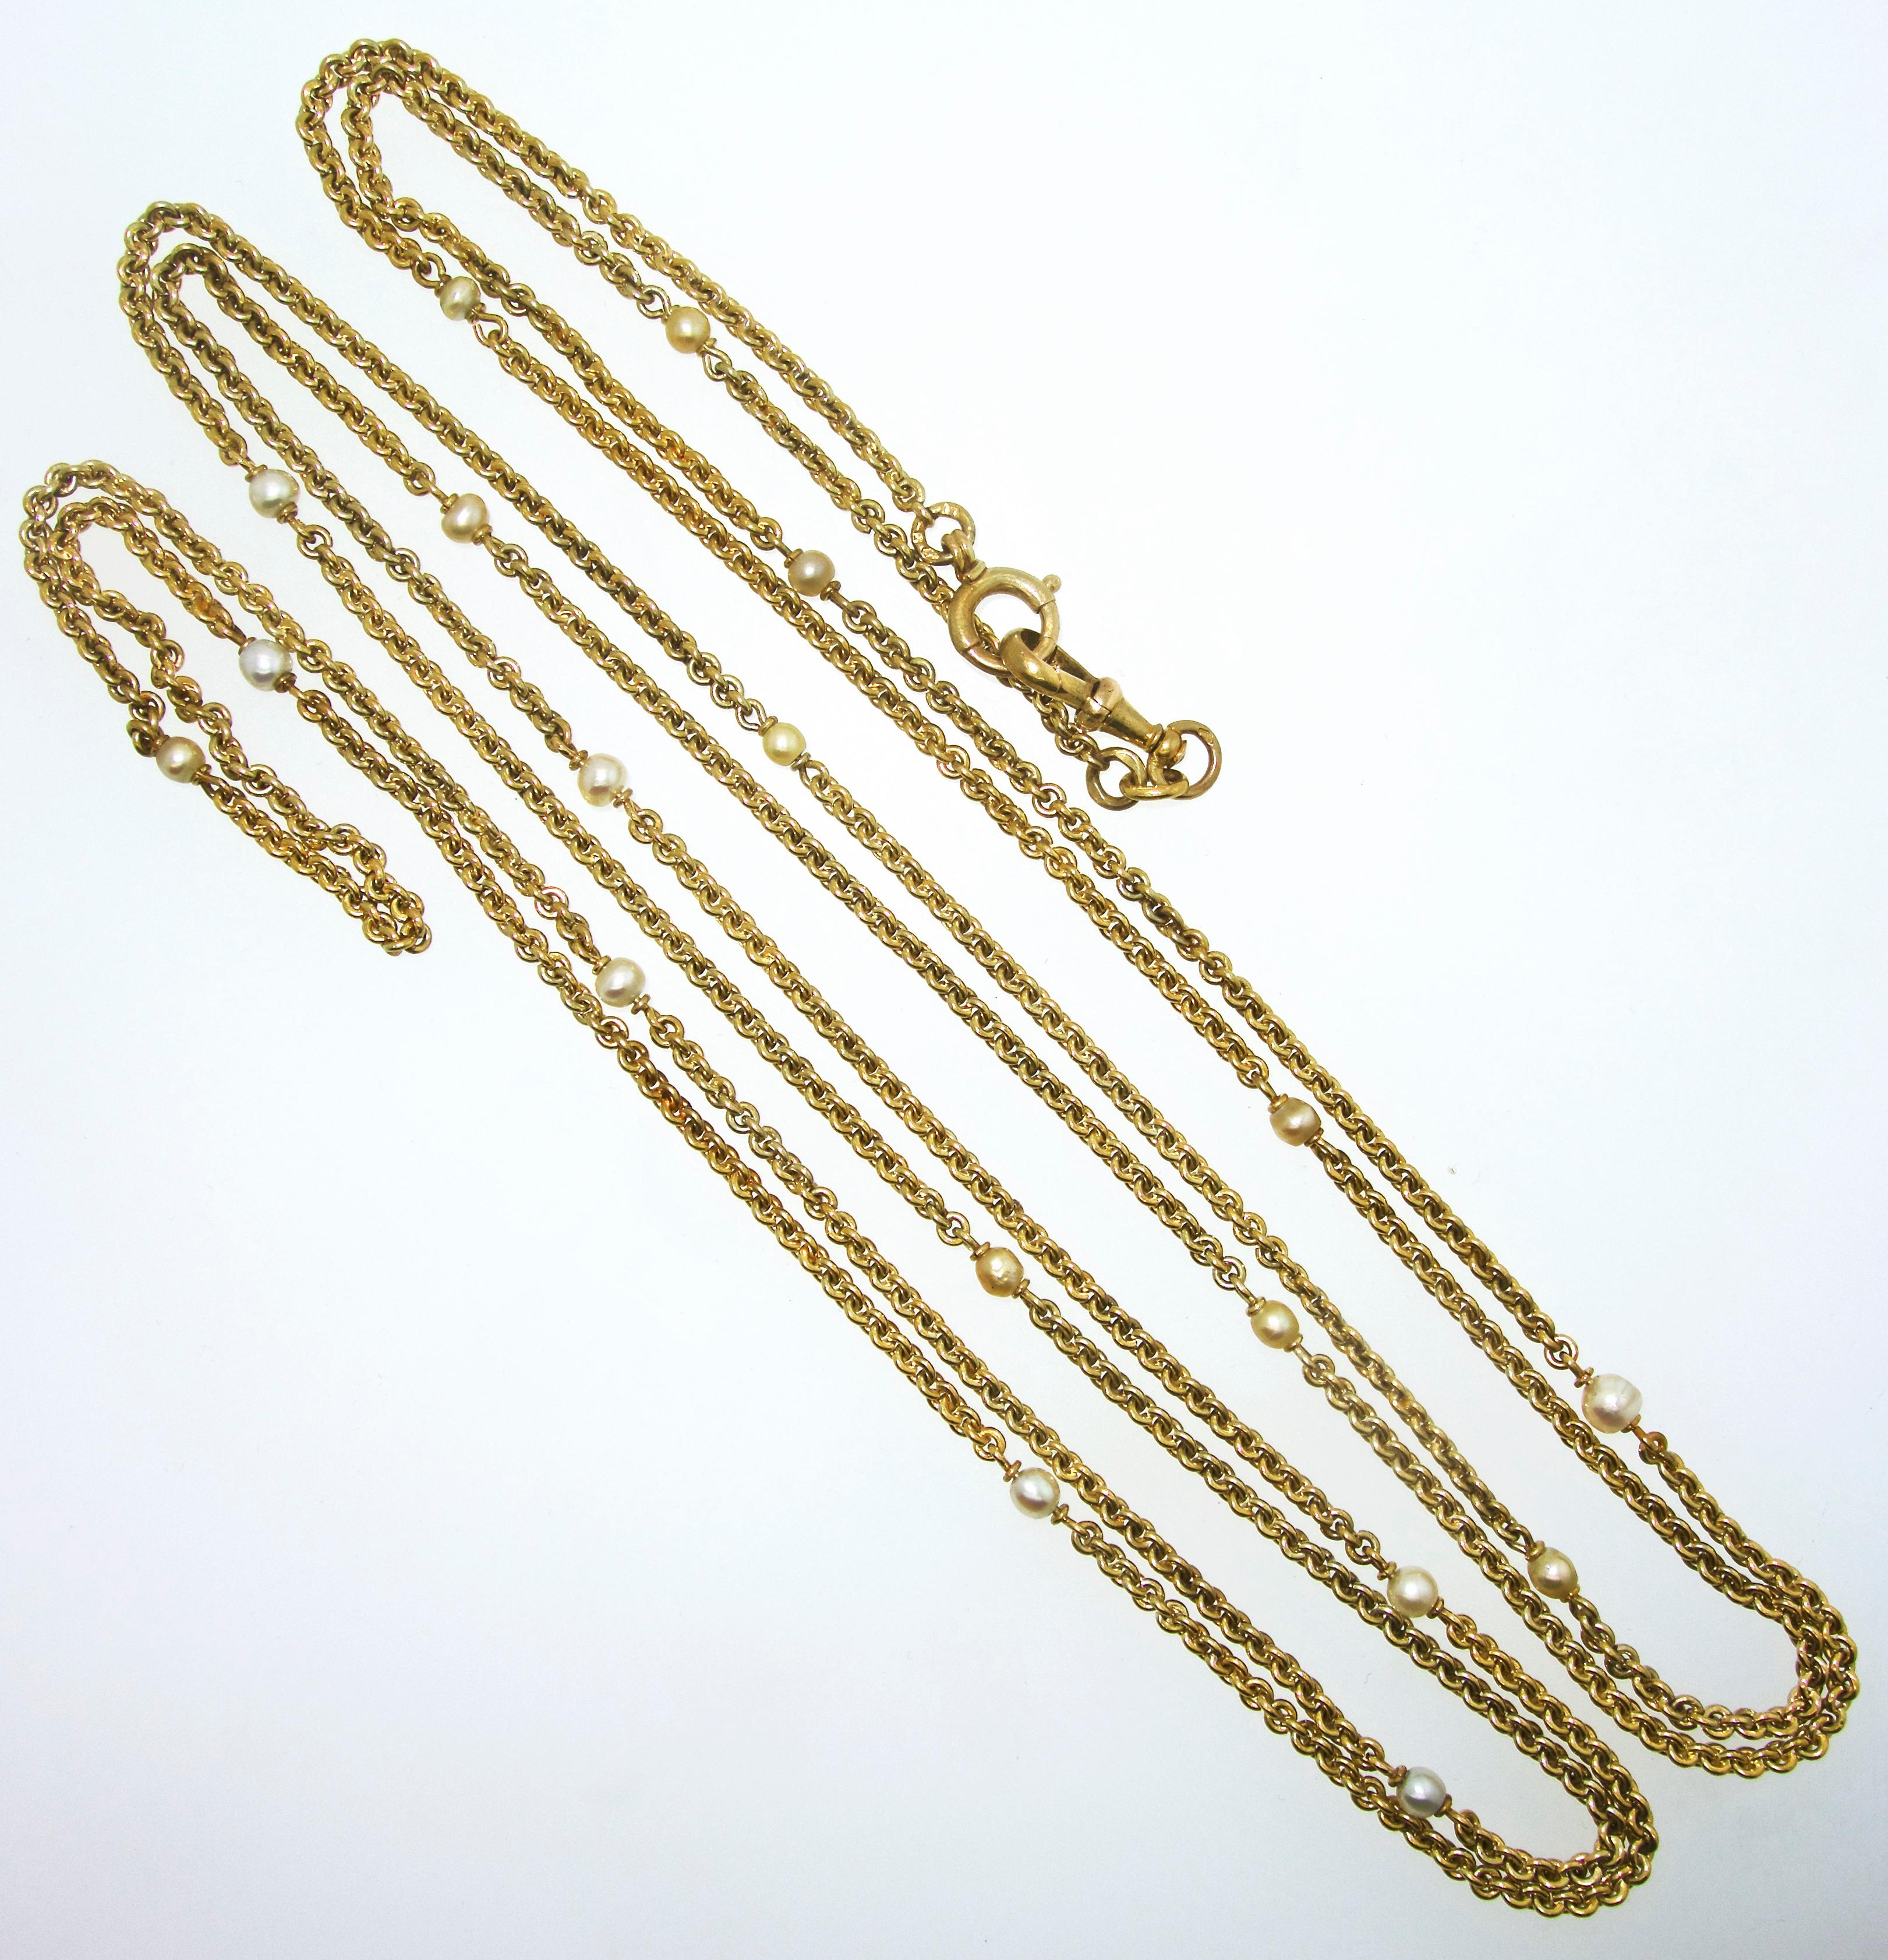 Antique gold handmade chain, late 19th century, interspersed with natural pearls.  This well made piece has 18 natural pearls.  The chain weighs 64.5 grams and is over 70 inches long.  Circa 1890